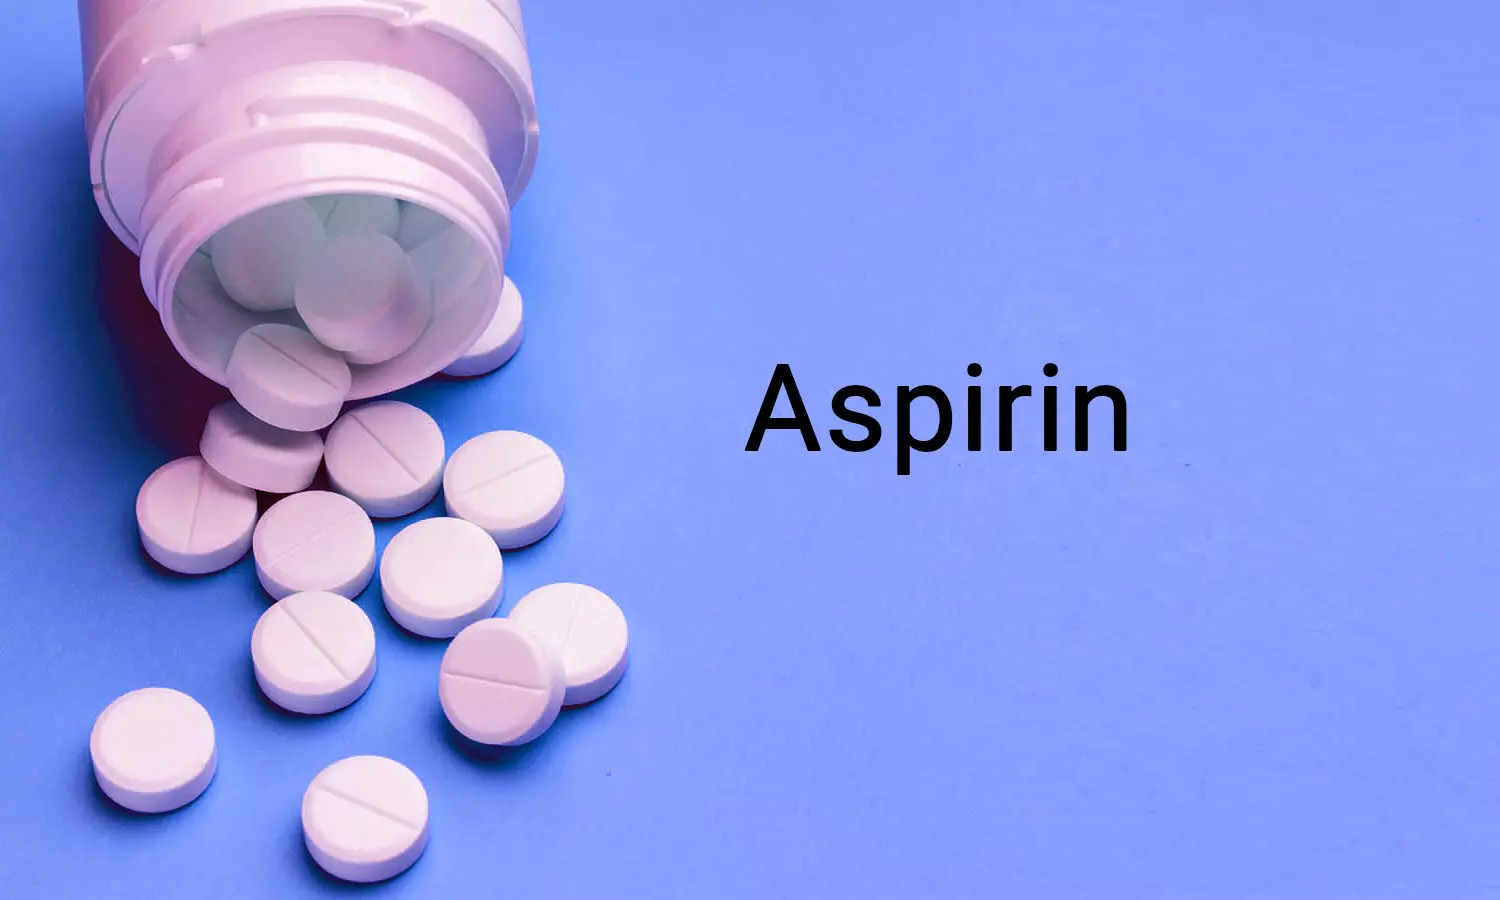 Aspirin may accelerate cancer progression in elderly, finds study